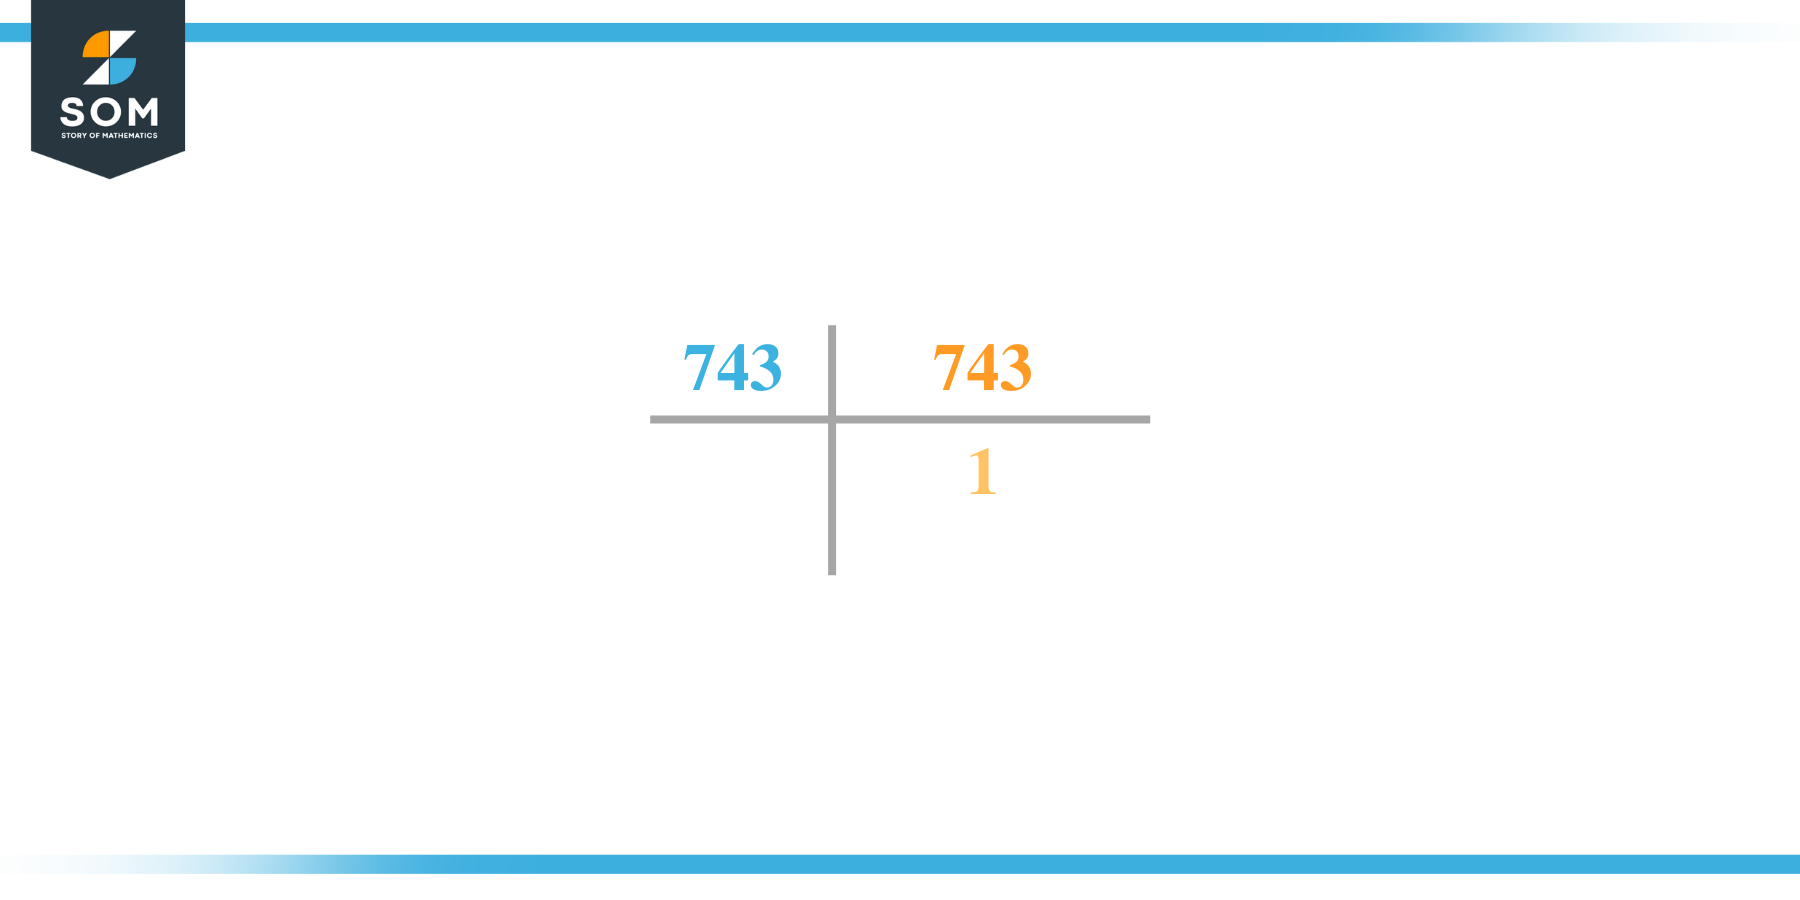 Prime factorization of seven hundred and forty three